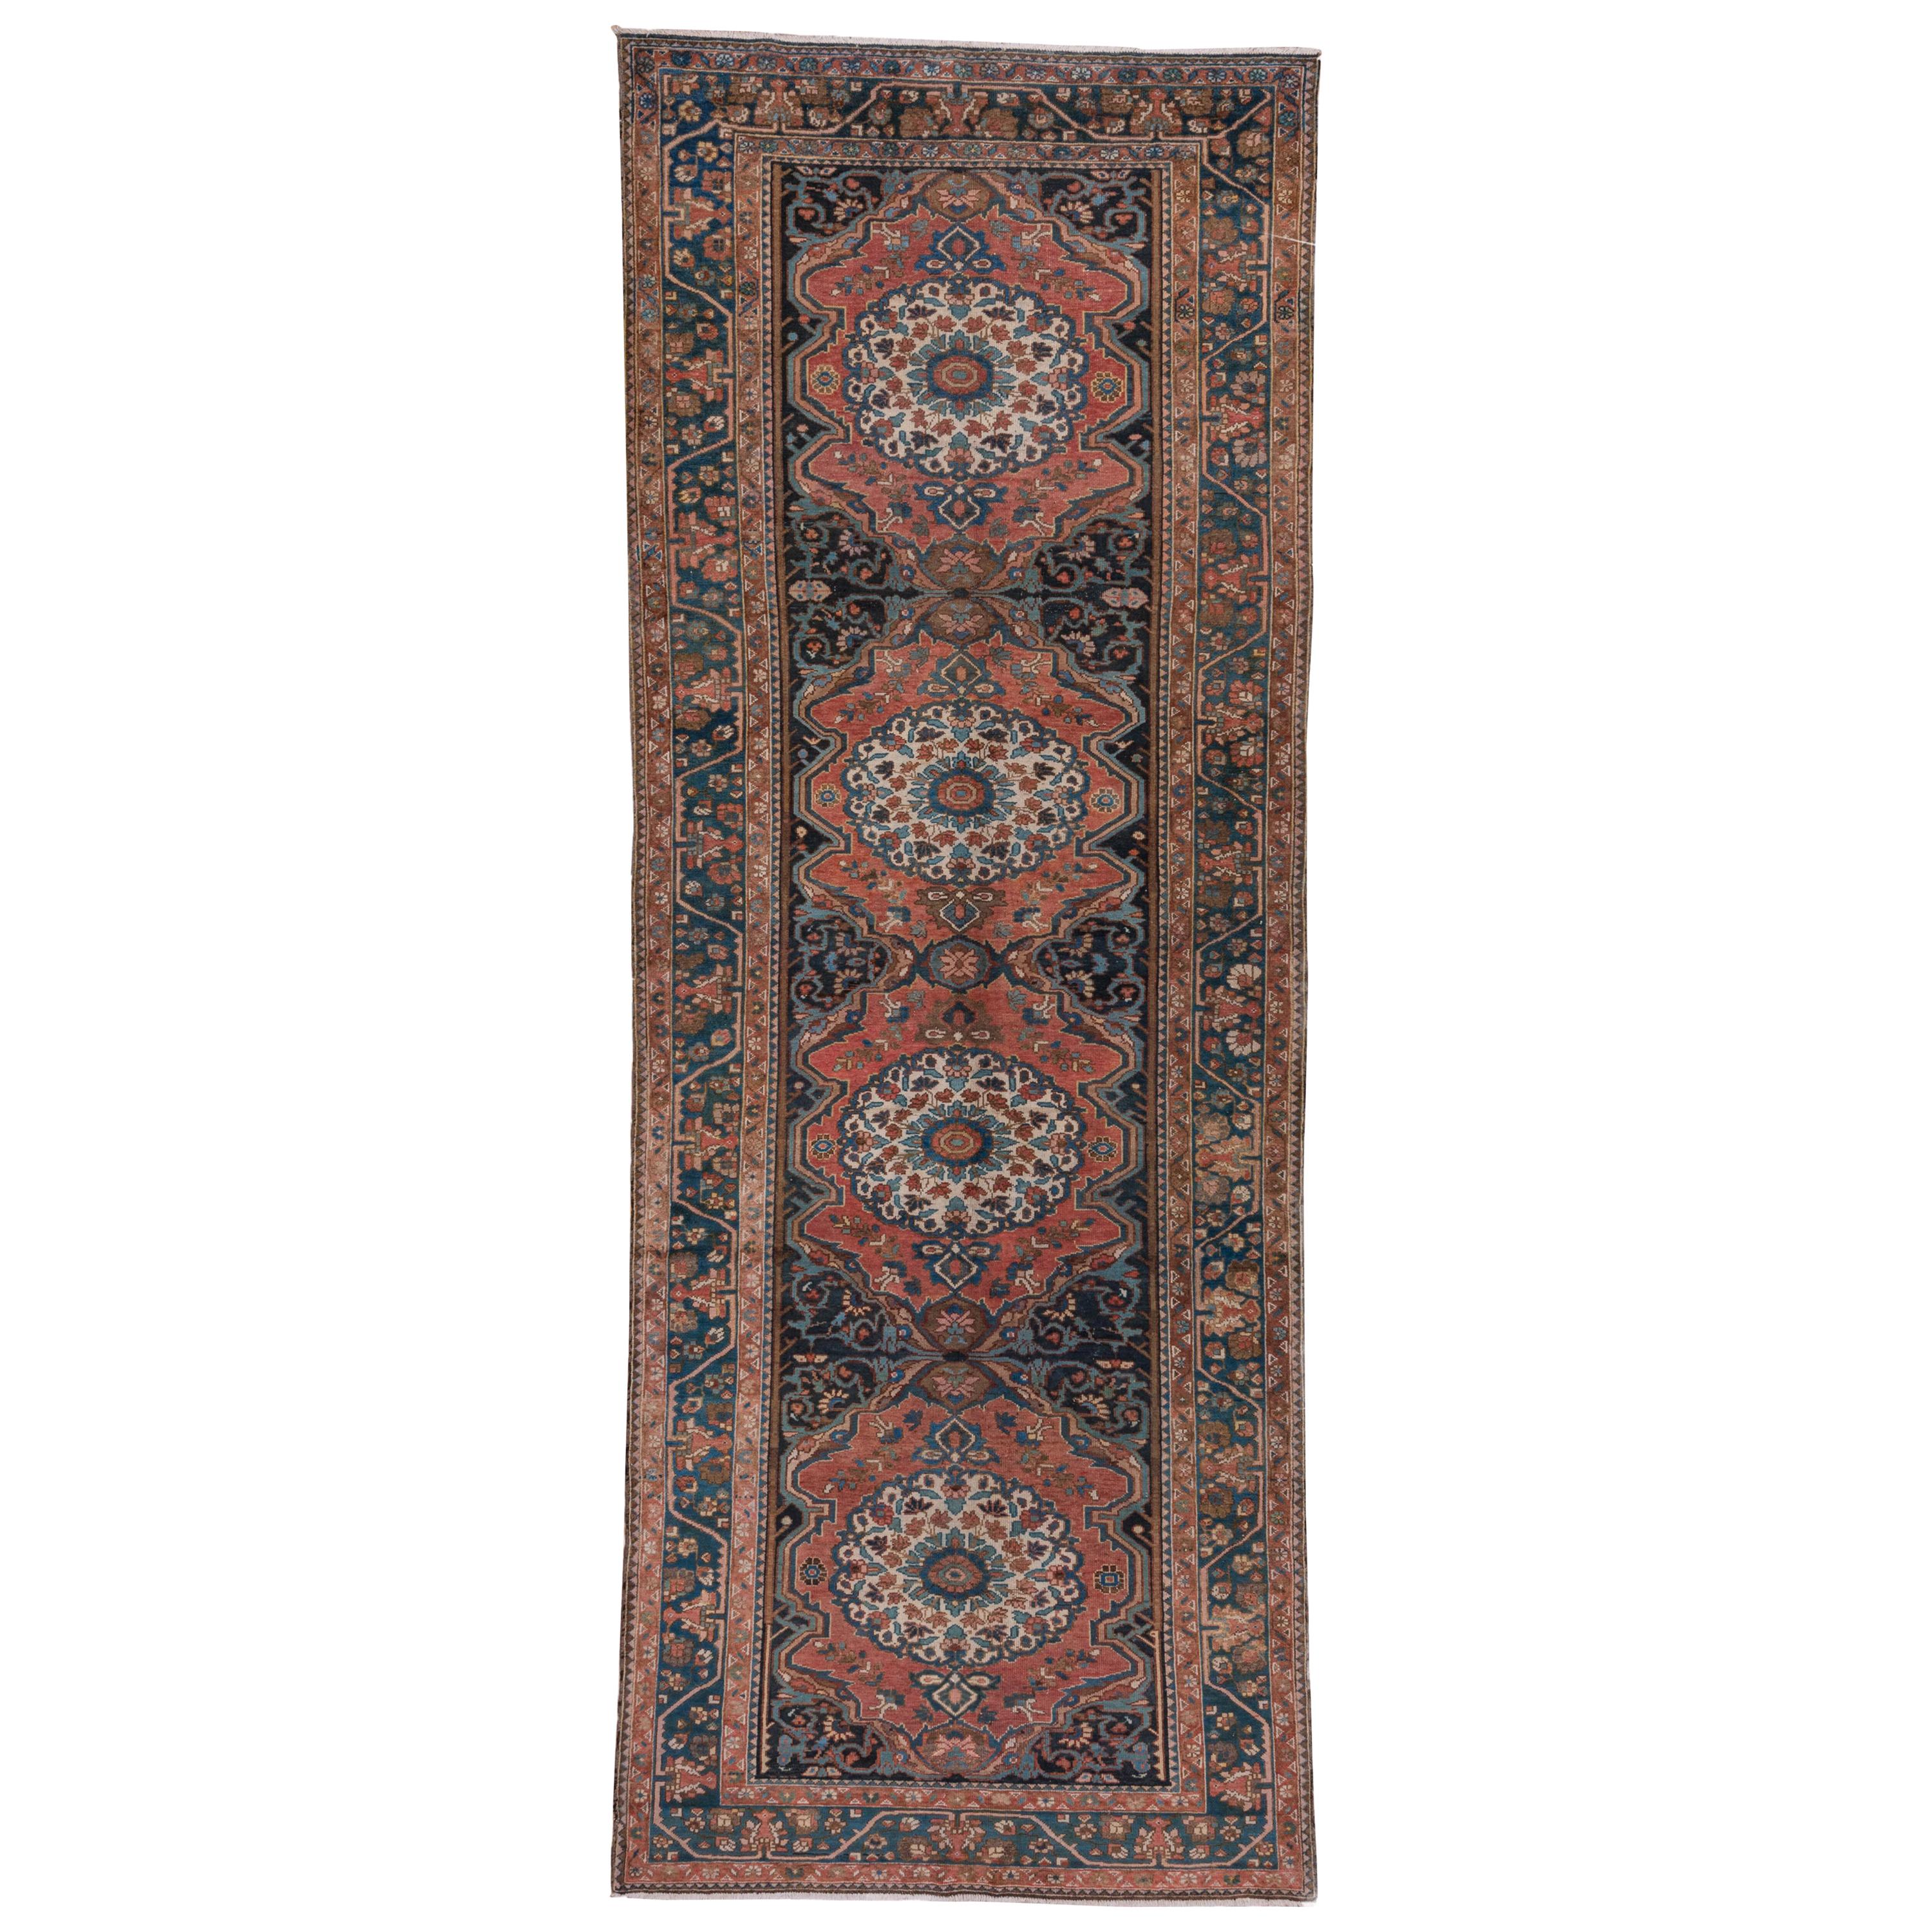 Antique Rustic Persian Bakhtiary Gallery Carpet, Rose and Blue Field